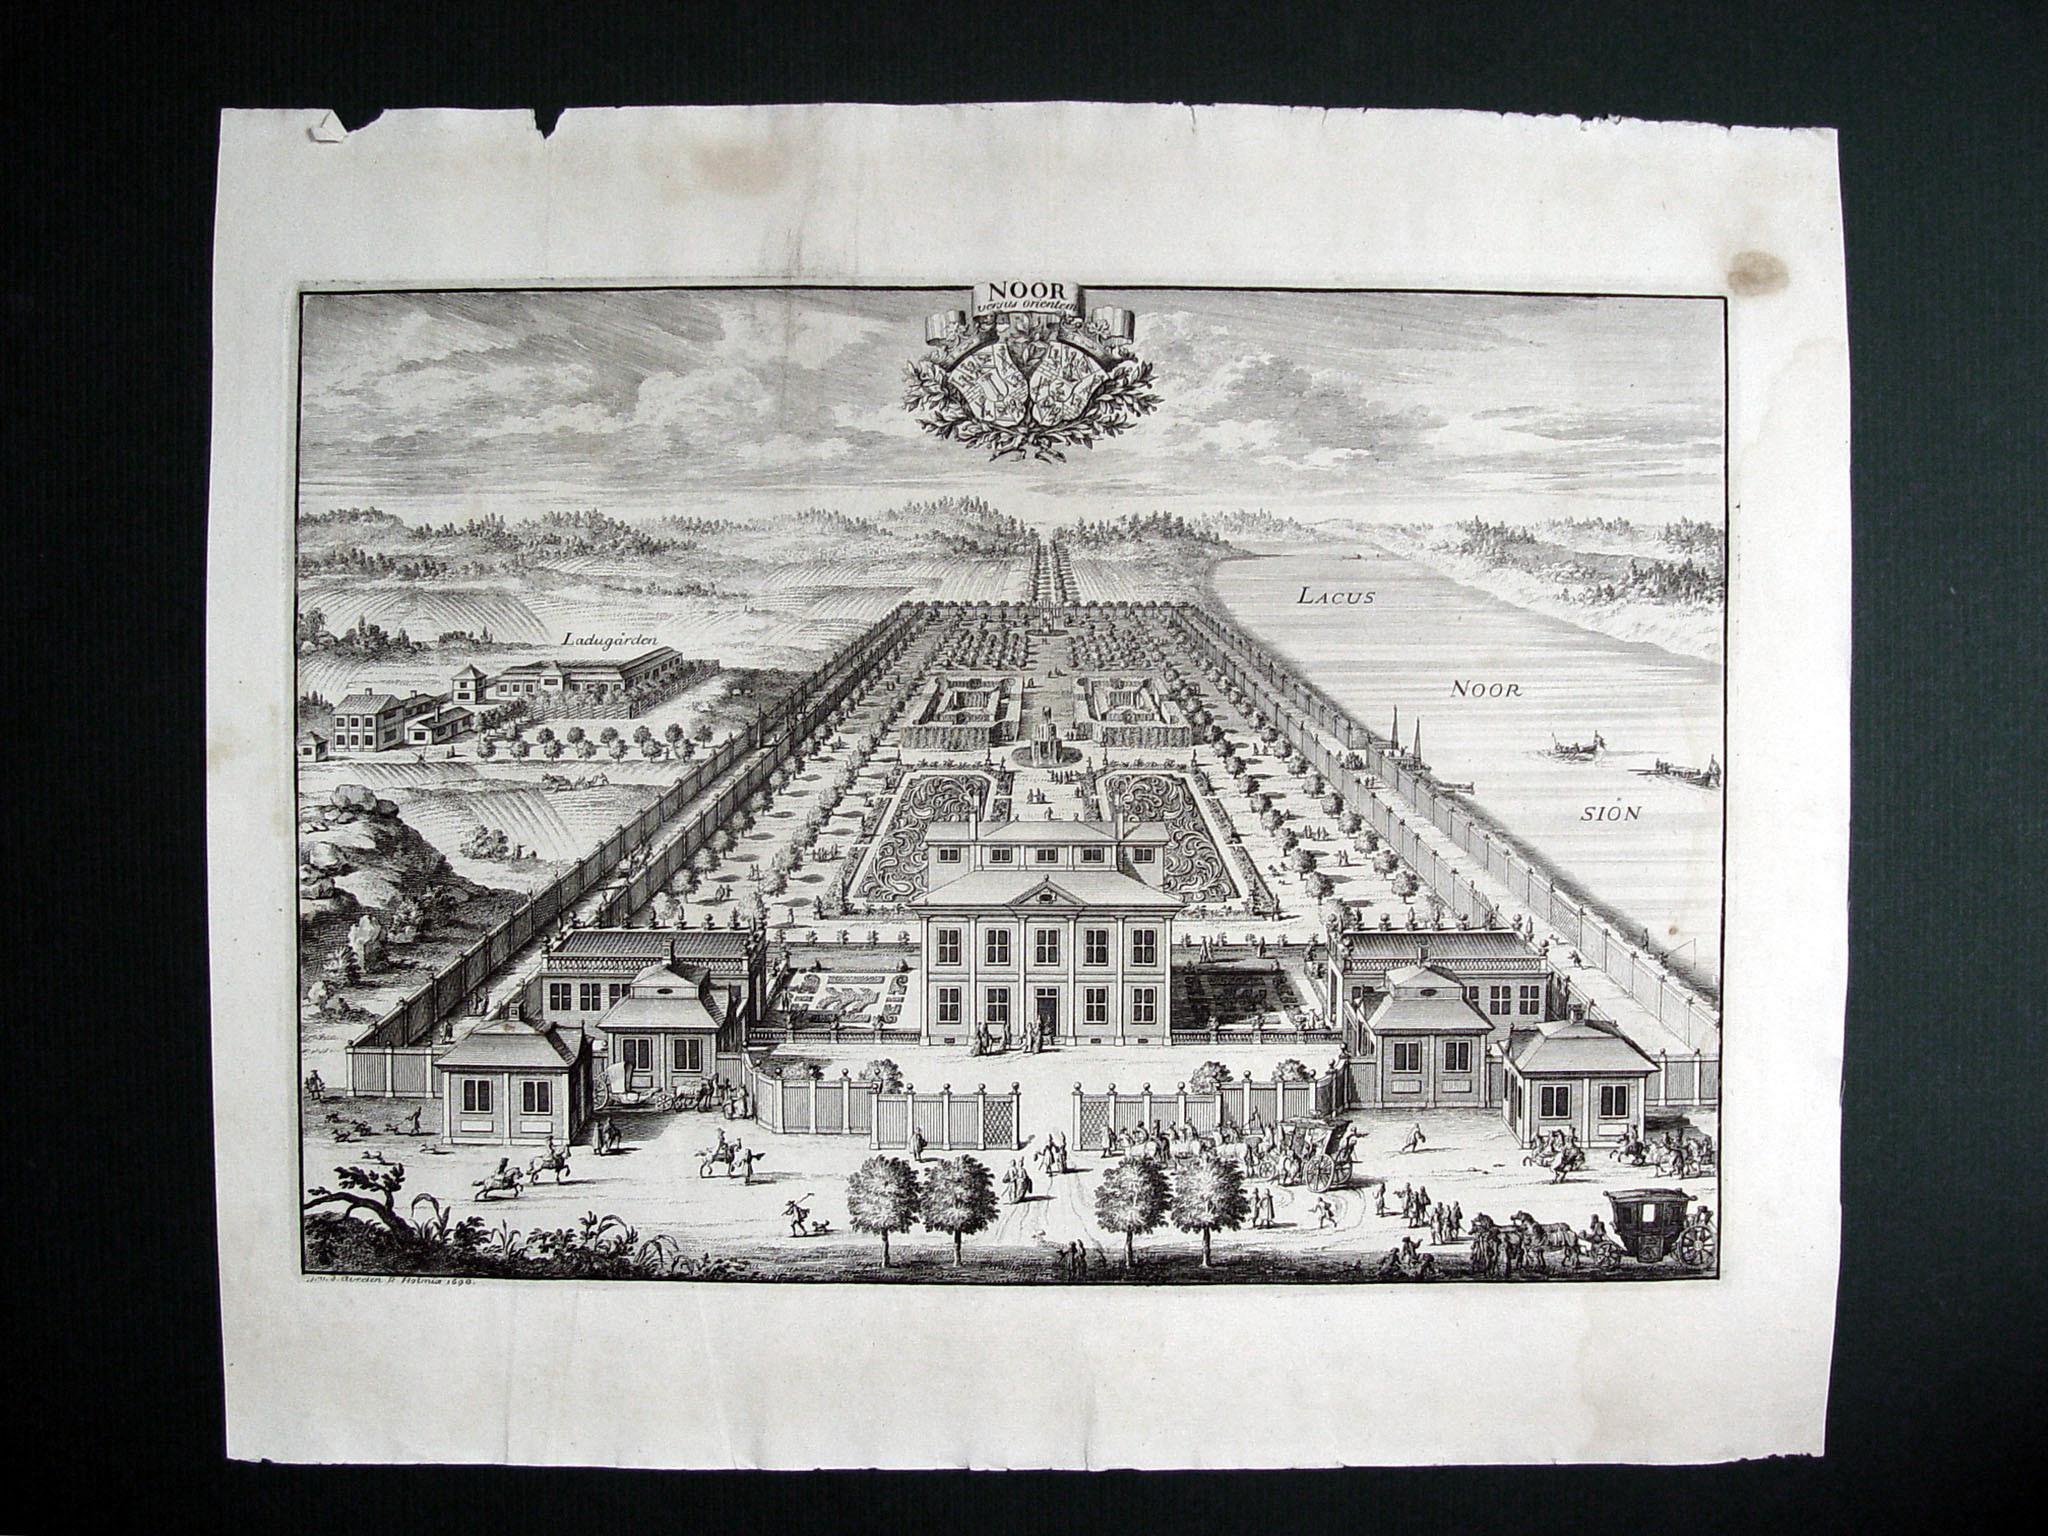 Set of 3 antique 1698 bird's-eye view etchings of Baroque Swedish estates and gardens by Johannes van den Aveelen, 1698. Includes Noor, Roserberg and Malma.  From a large series of etchings collected by Erik Dahlberg of Swedish estates. Unframed,